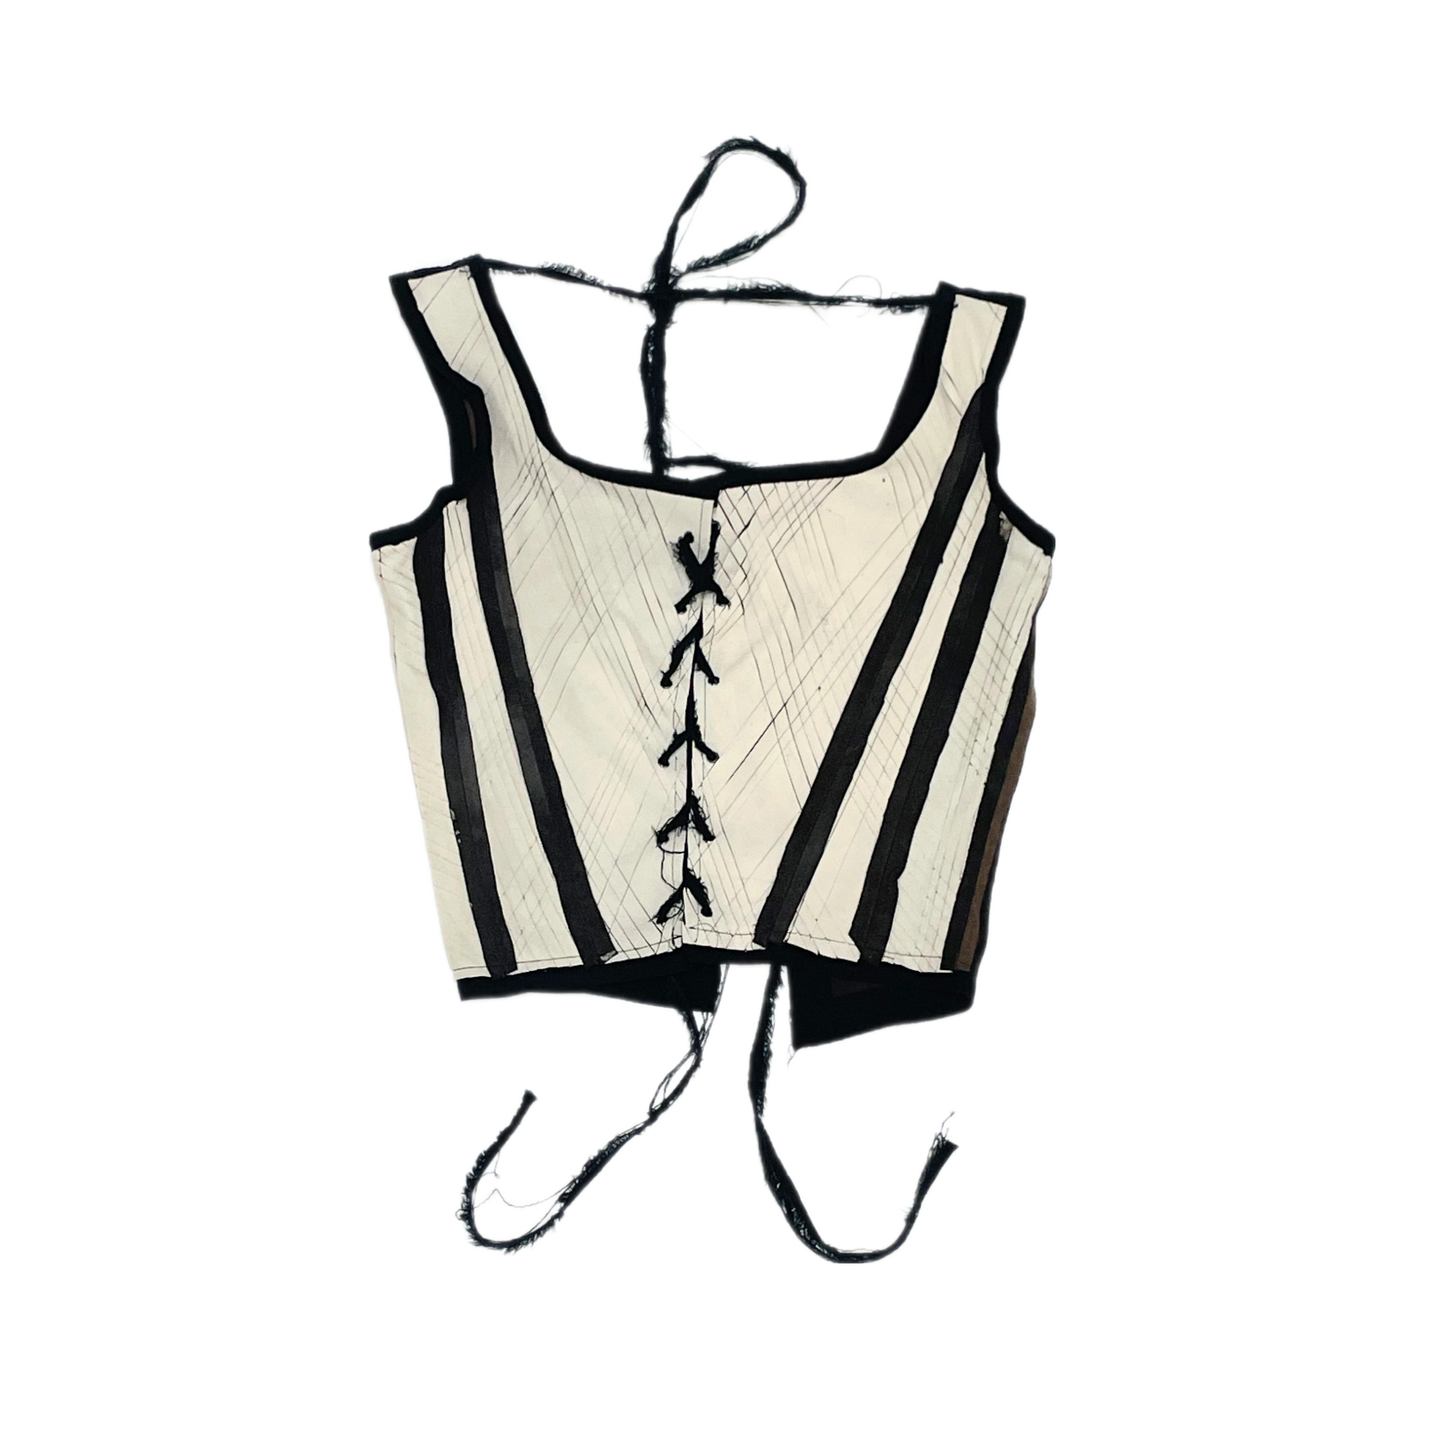 Reversible Deconstructed Corset in Upcycled Treated Leather in Brown, and Off-White with Cotton Twill Ties